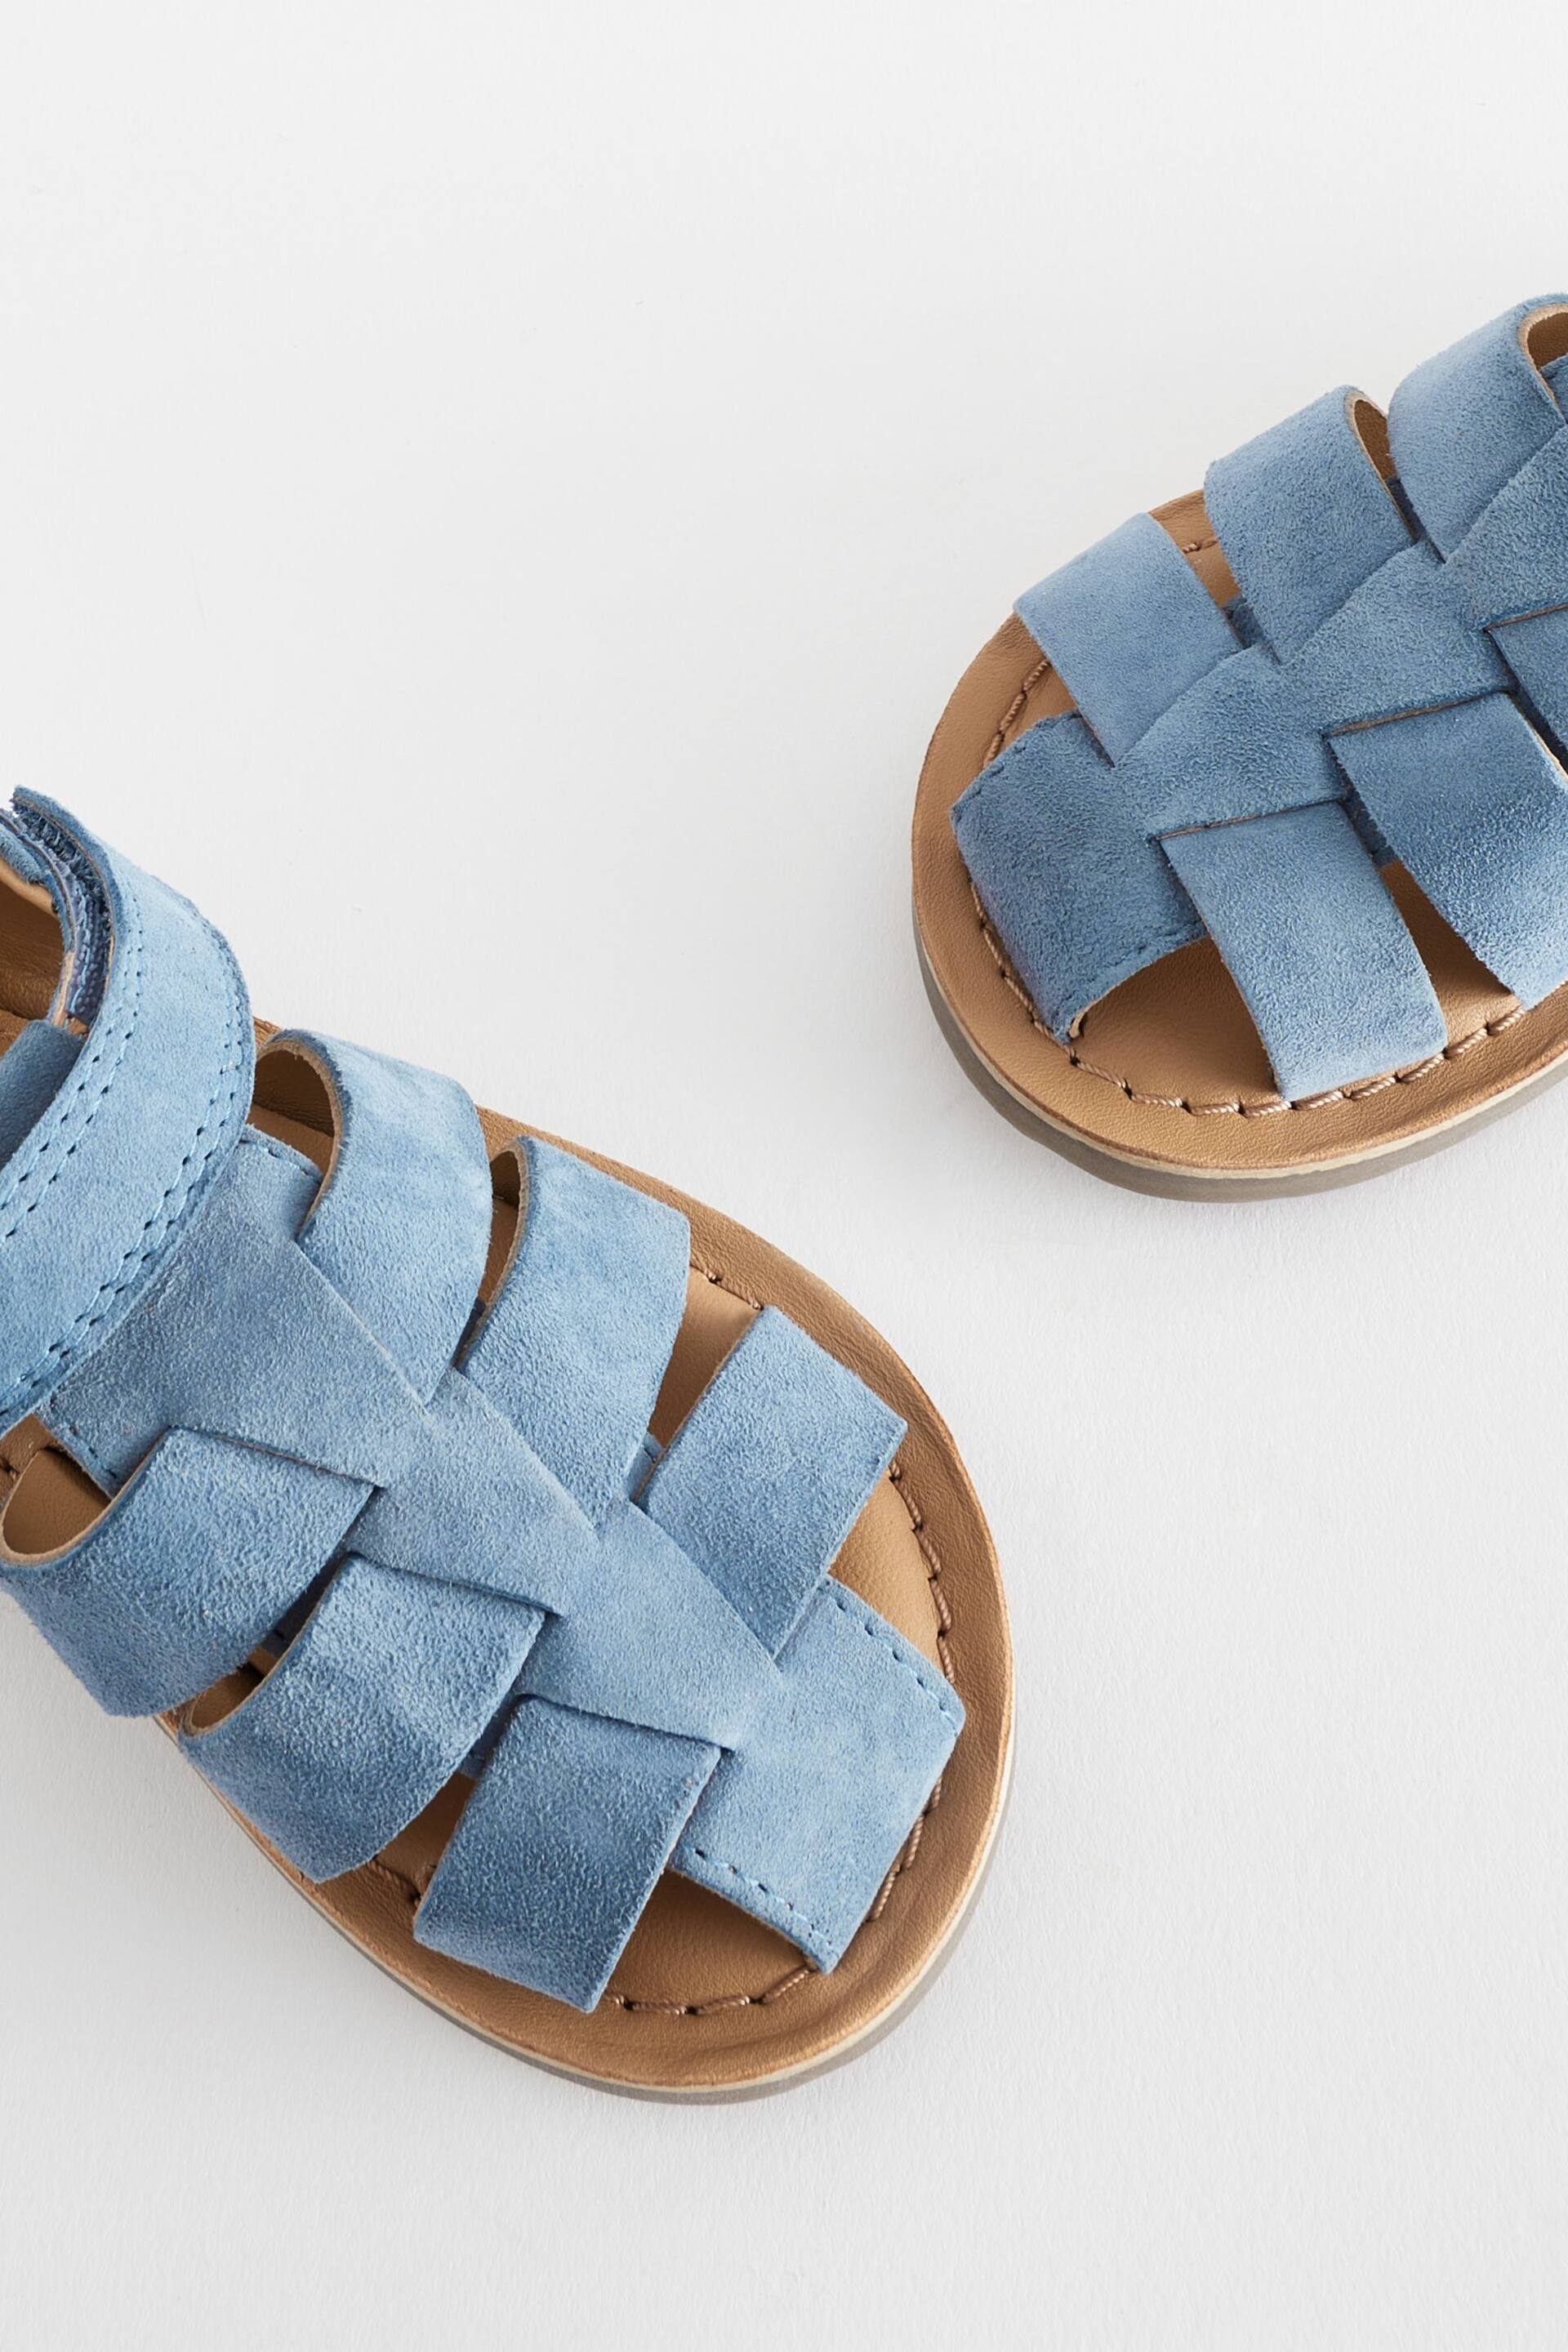 Blue Leather Closed Toe Touch Fastening Sandals - Image 6 of 7